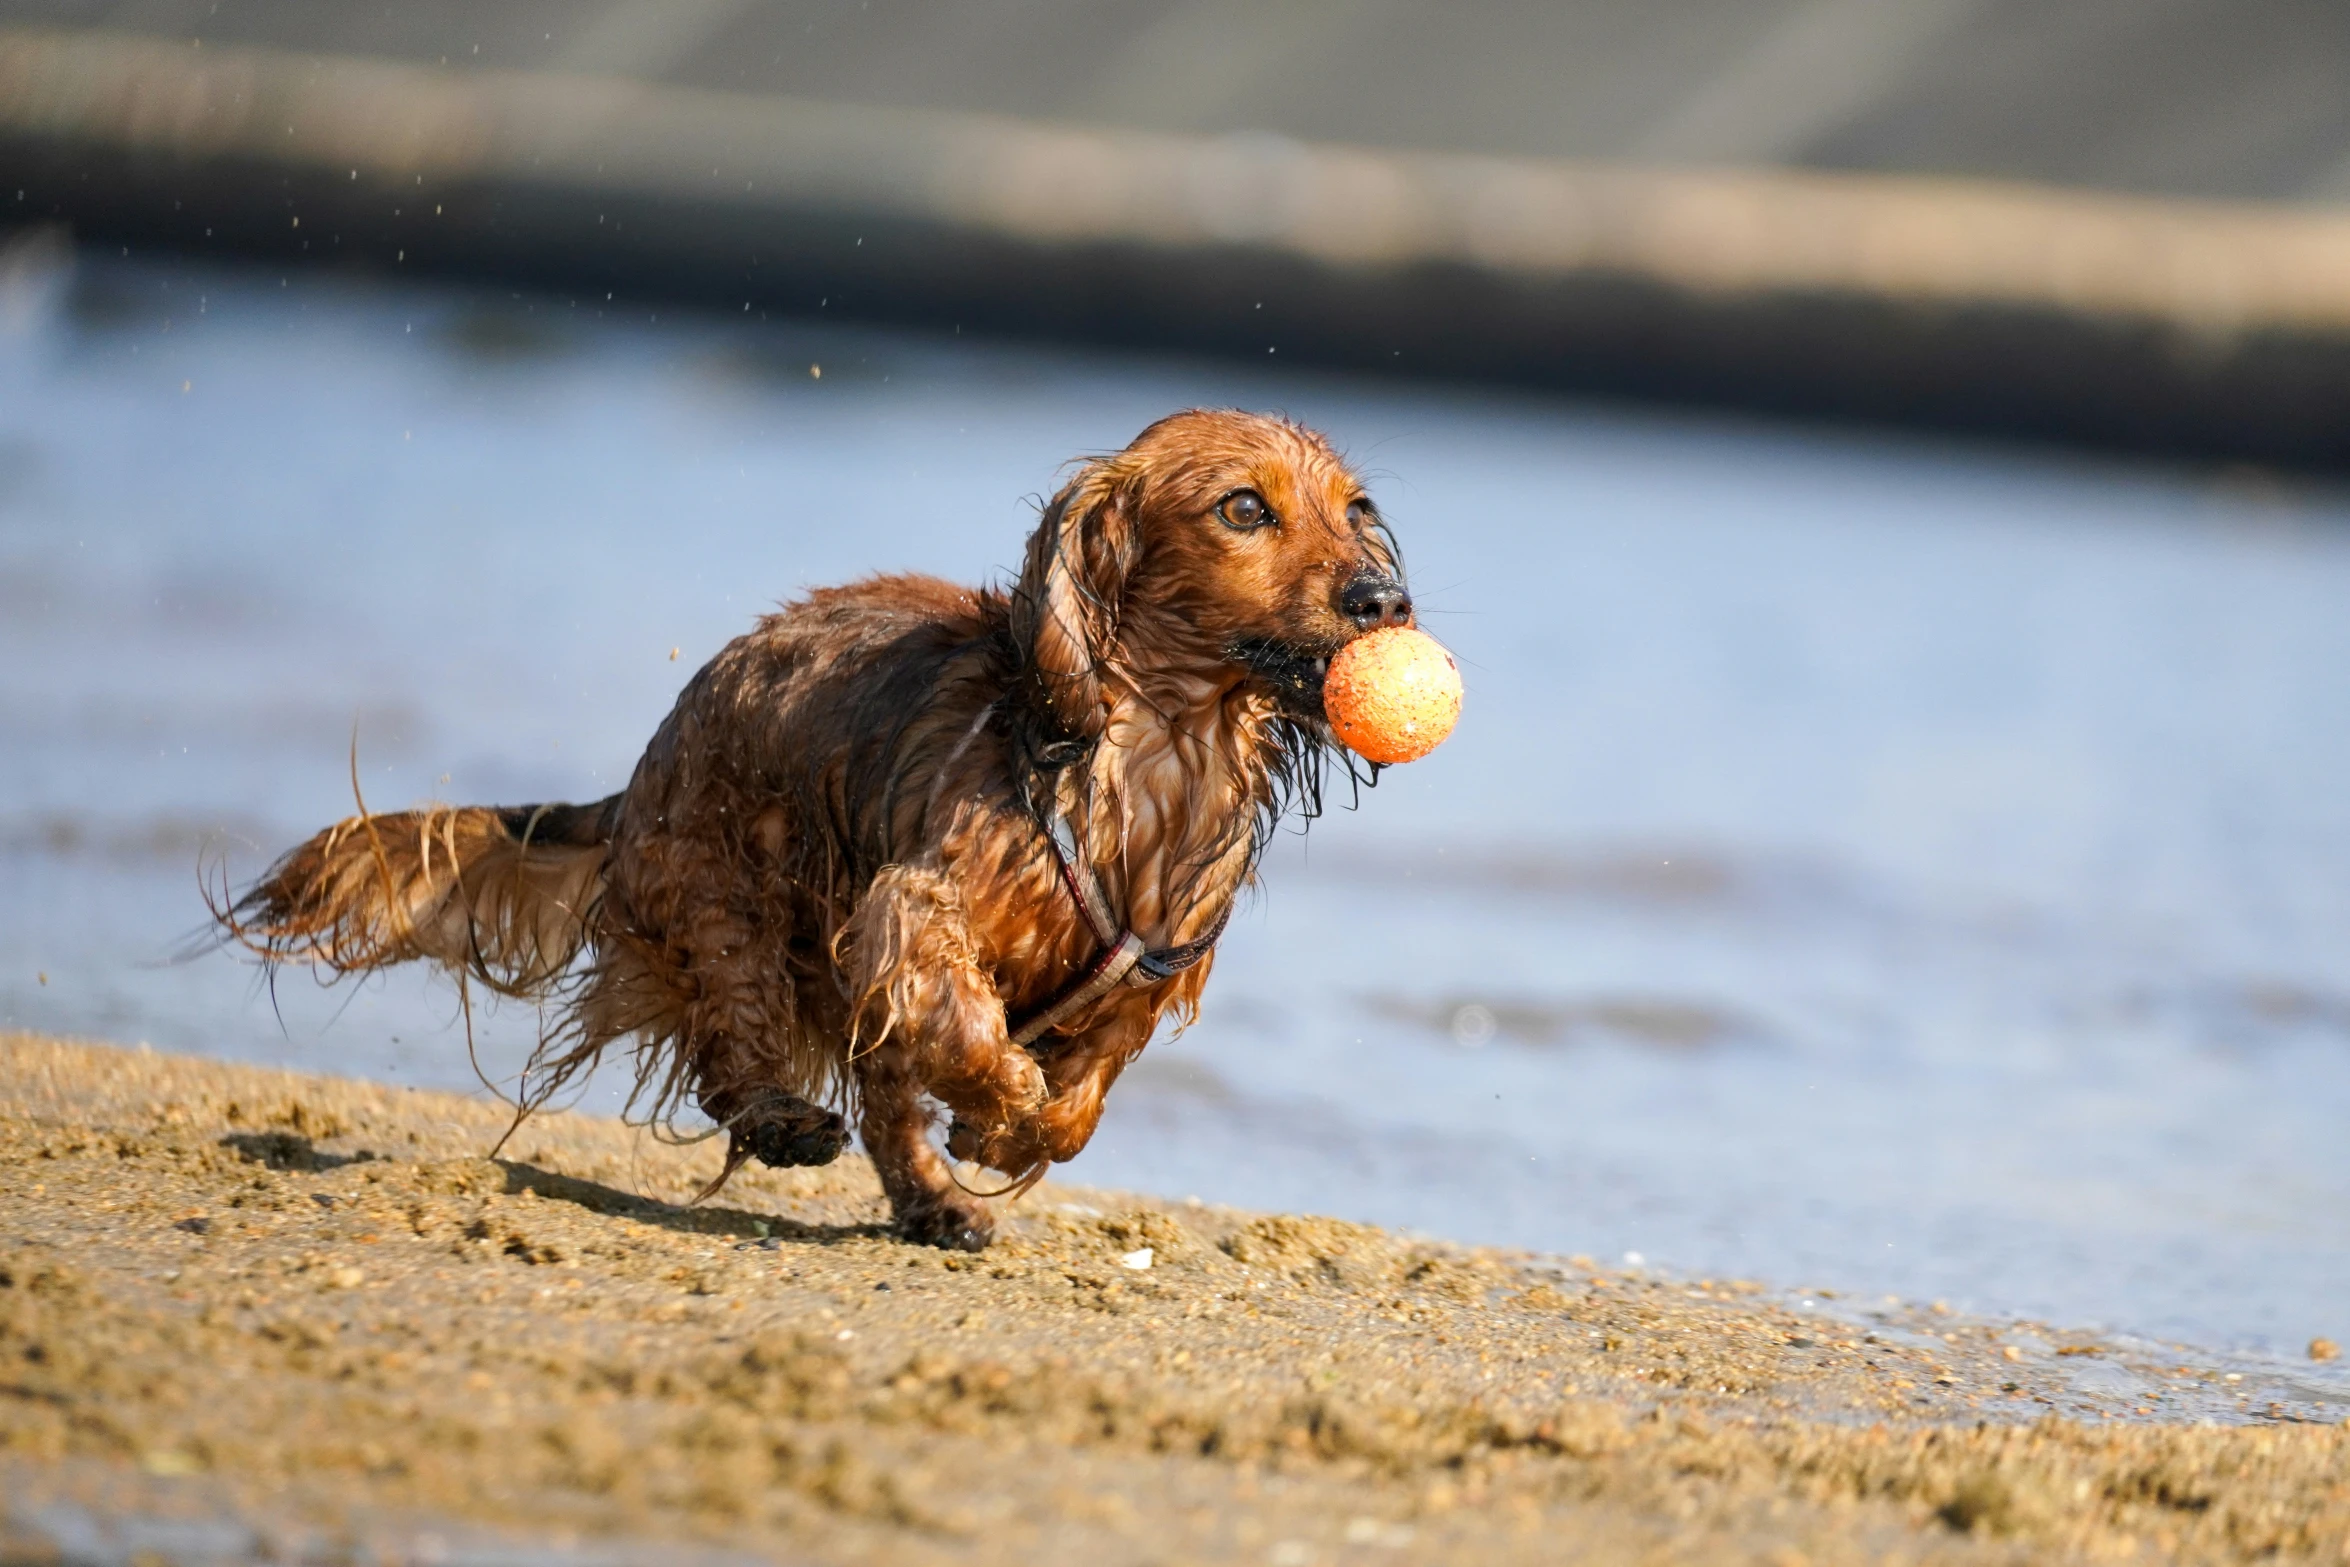 dog carrying a ball in it's mouth on a beach